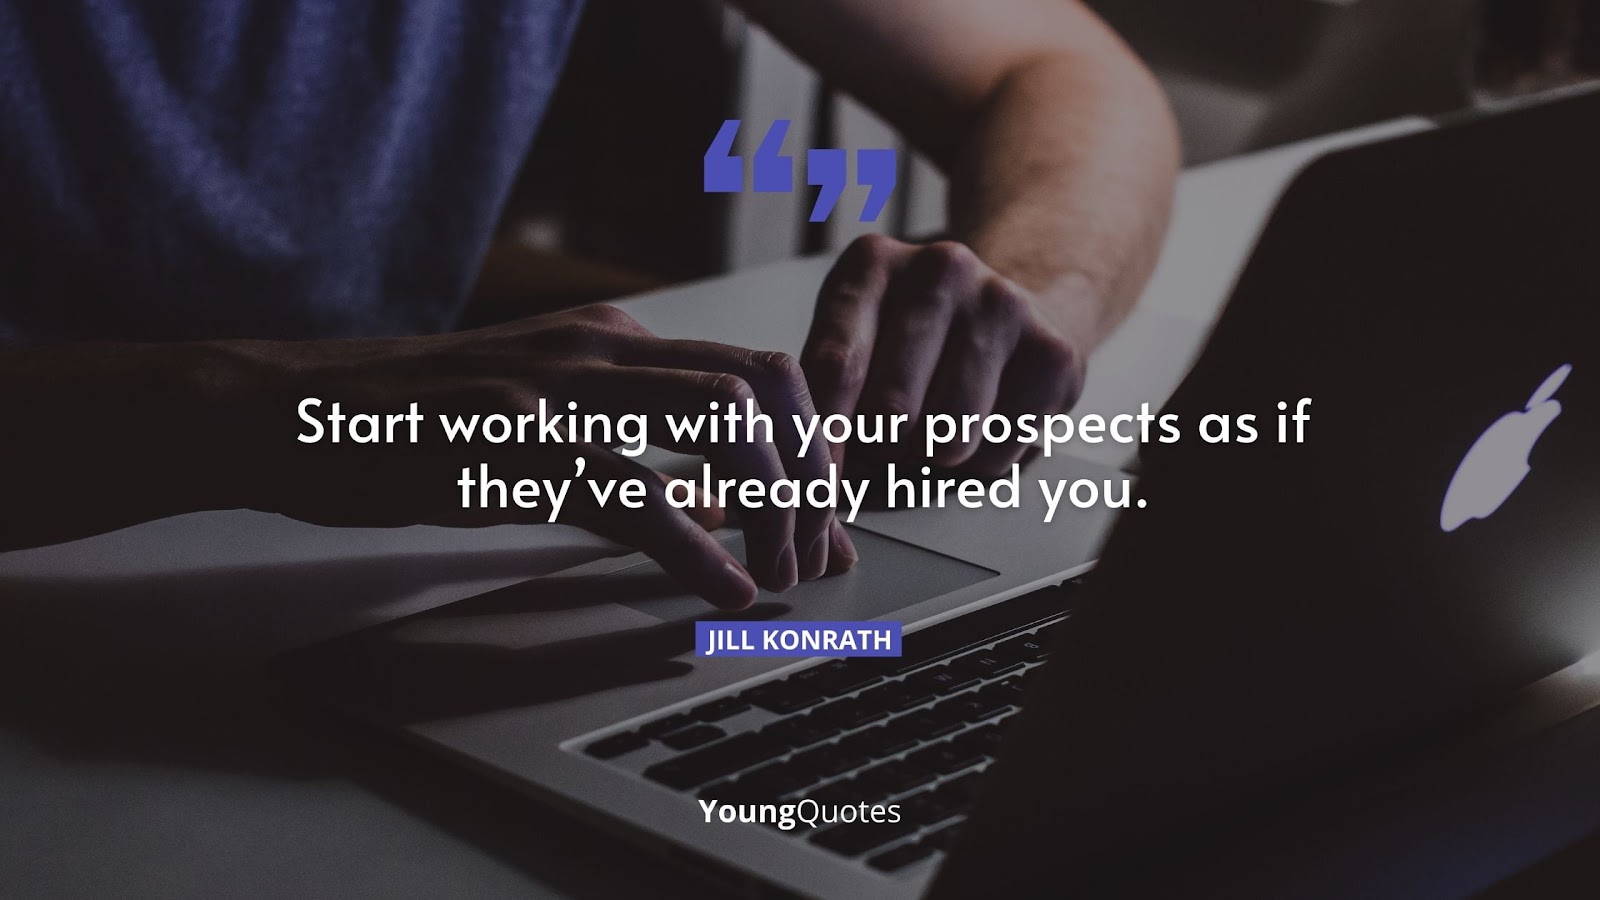 Start working with your prospects as if they’ve already hired you. – Jill Konrath